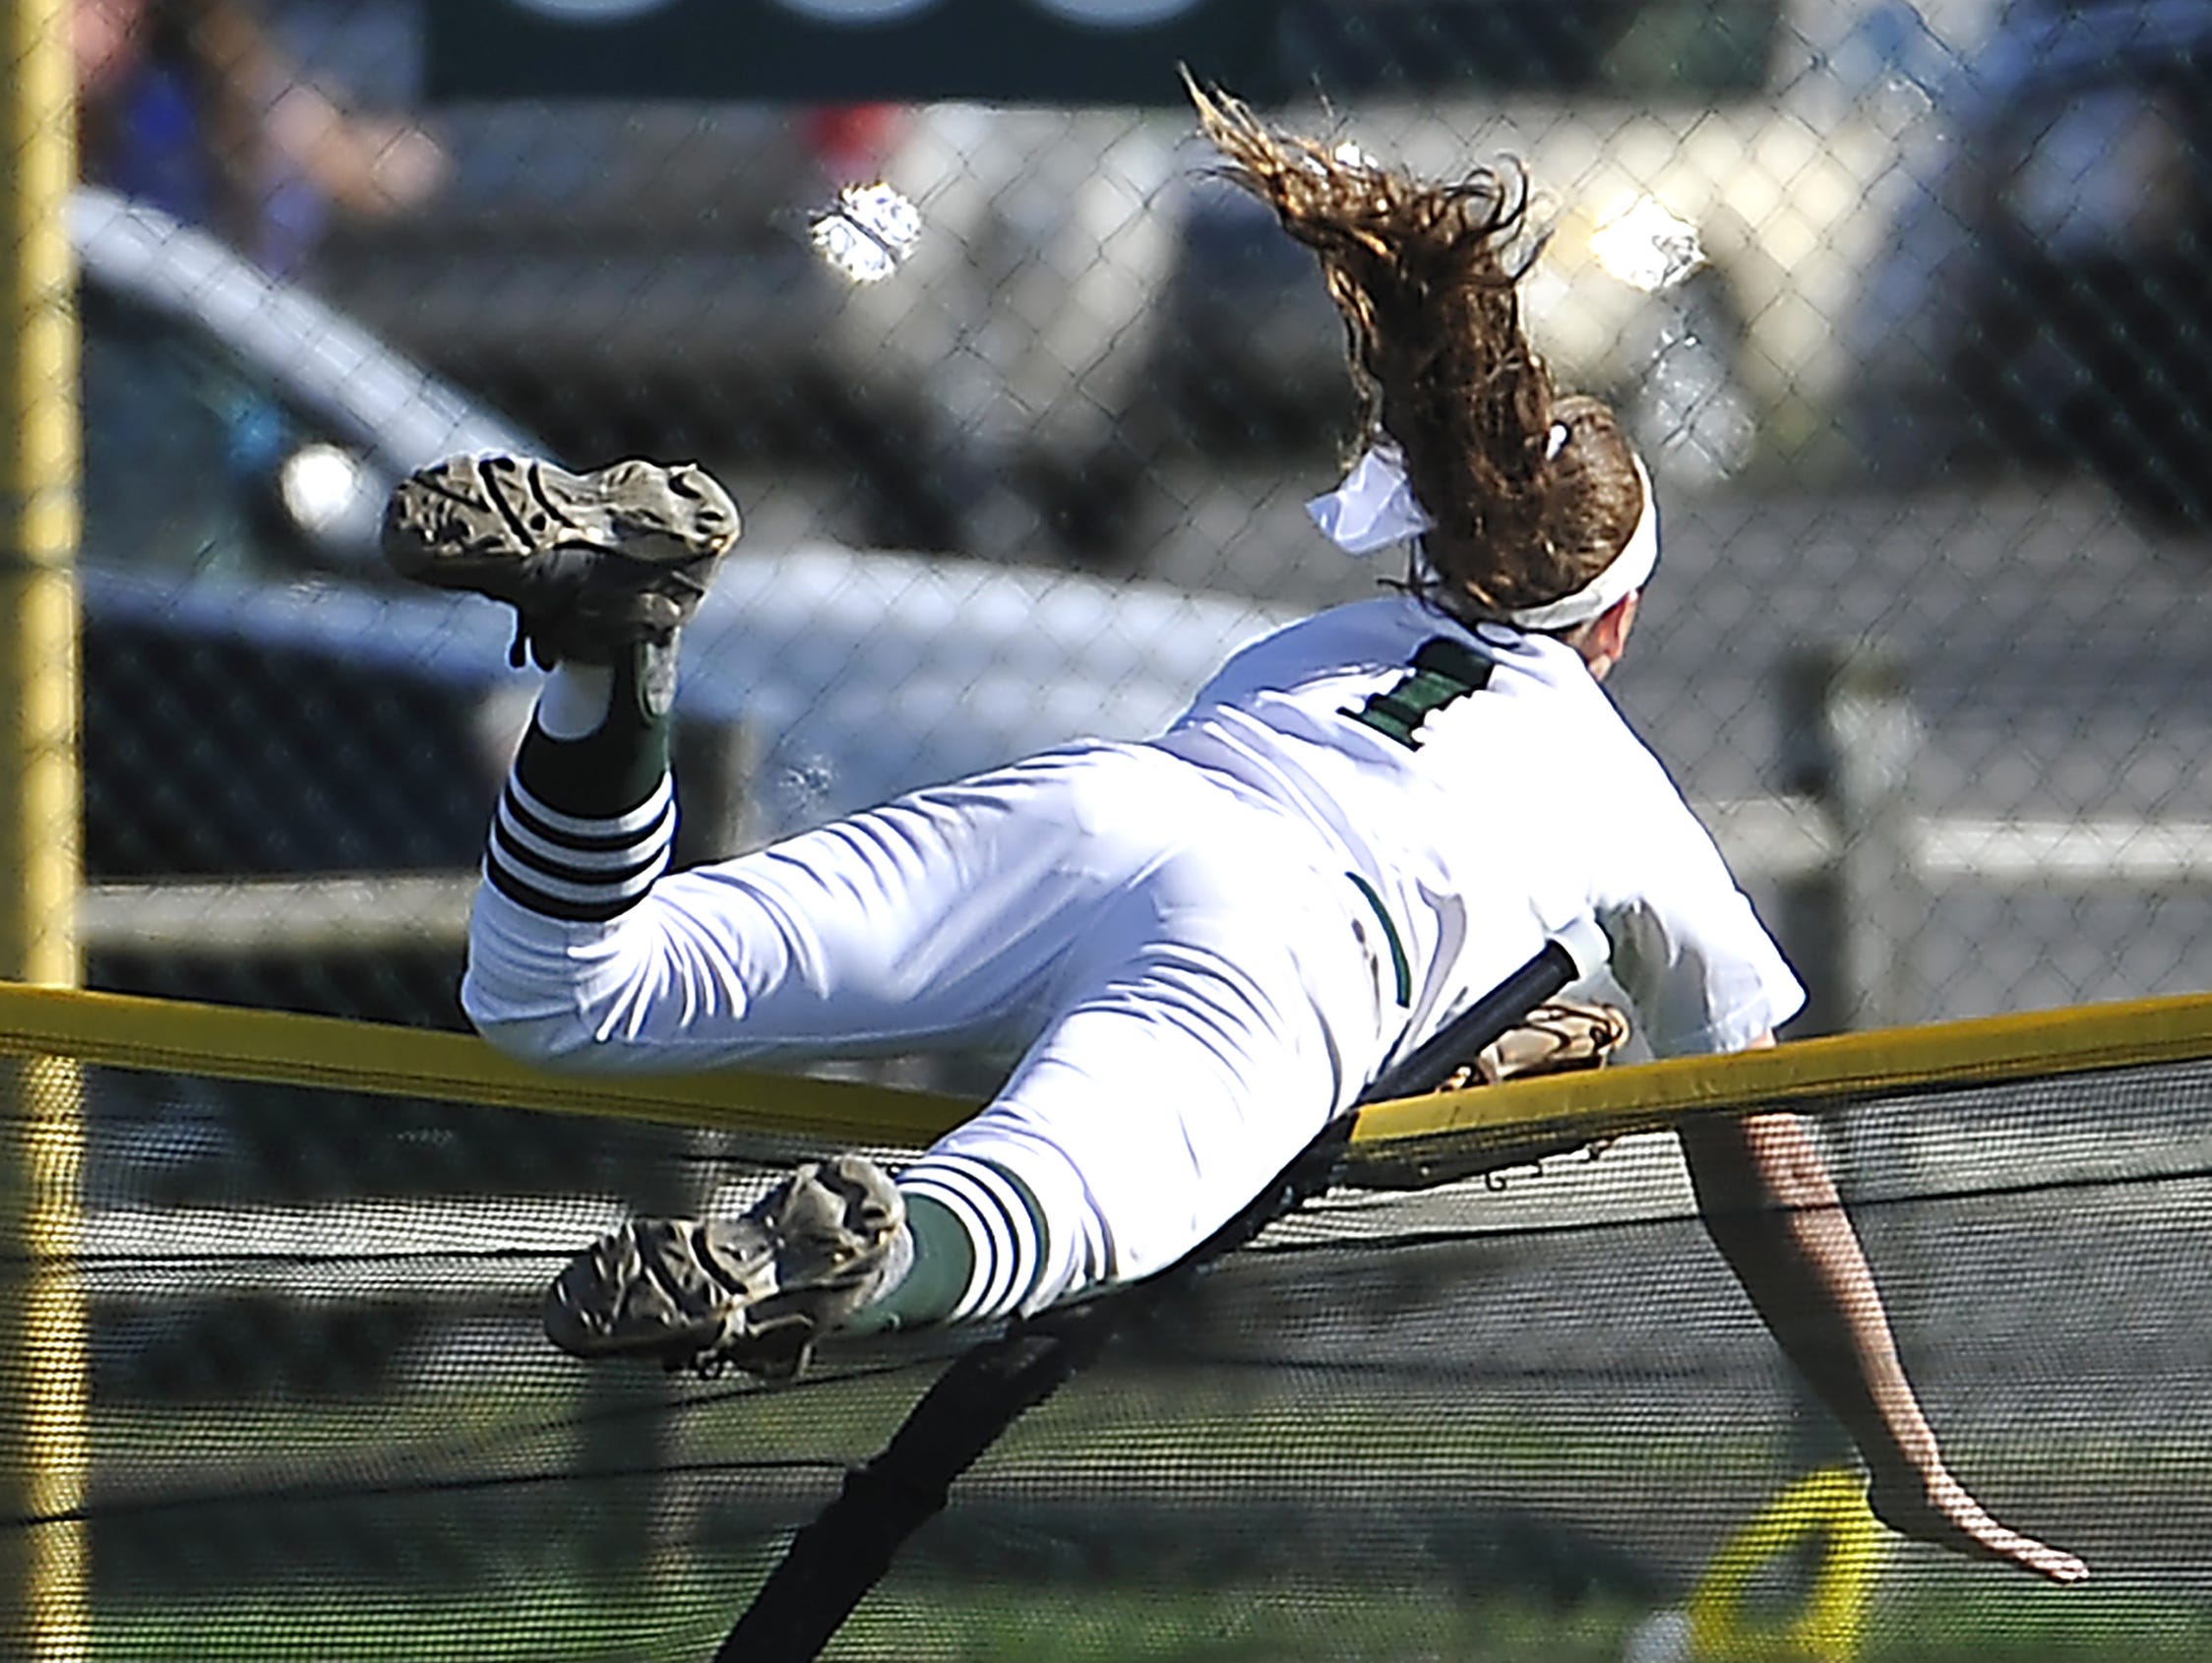 Outfielder Brooke Eakes goes over the fence after catching what would have been a home run as Friendship Christian plays Kings Academy in the A championship game Friday.